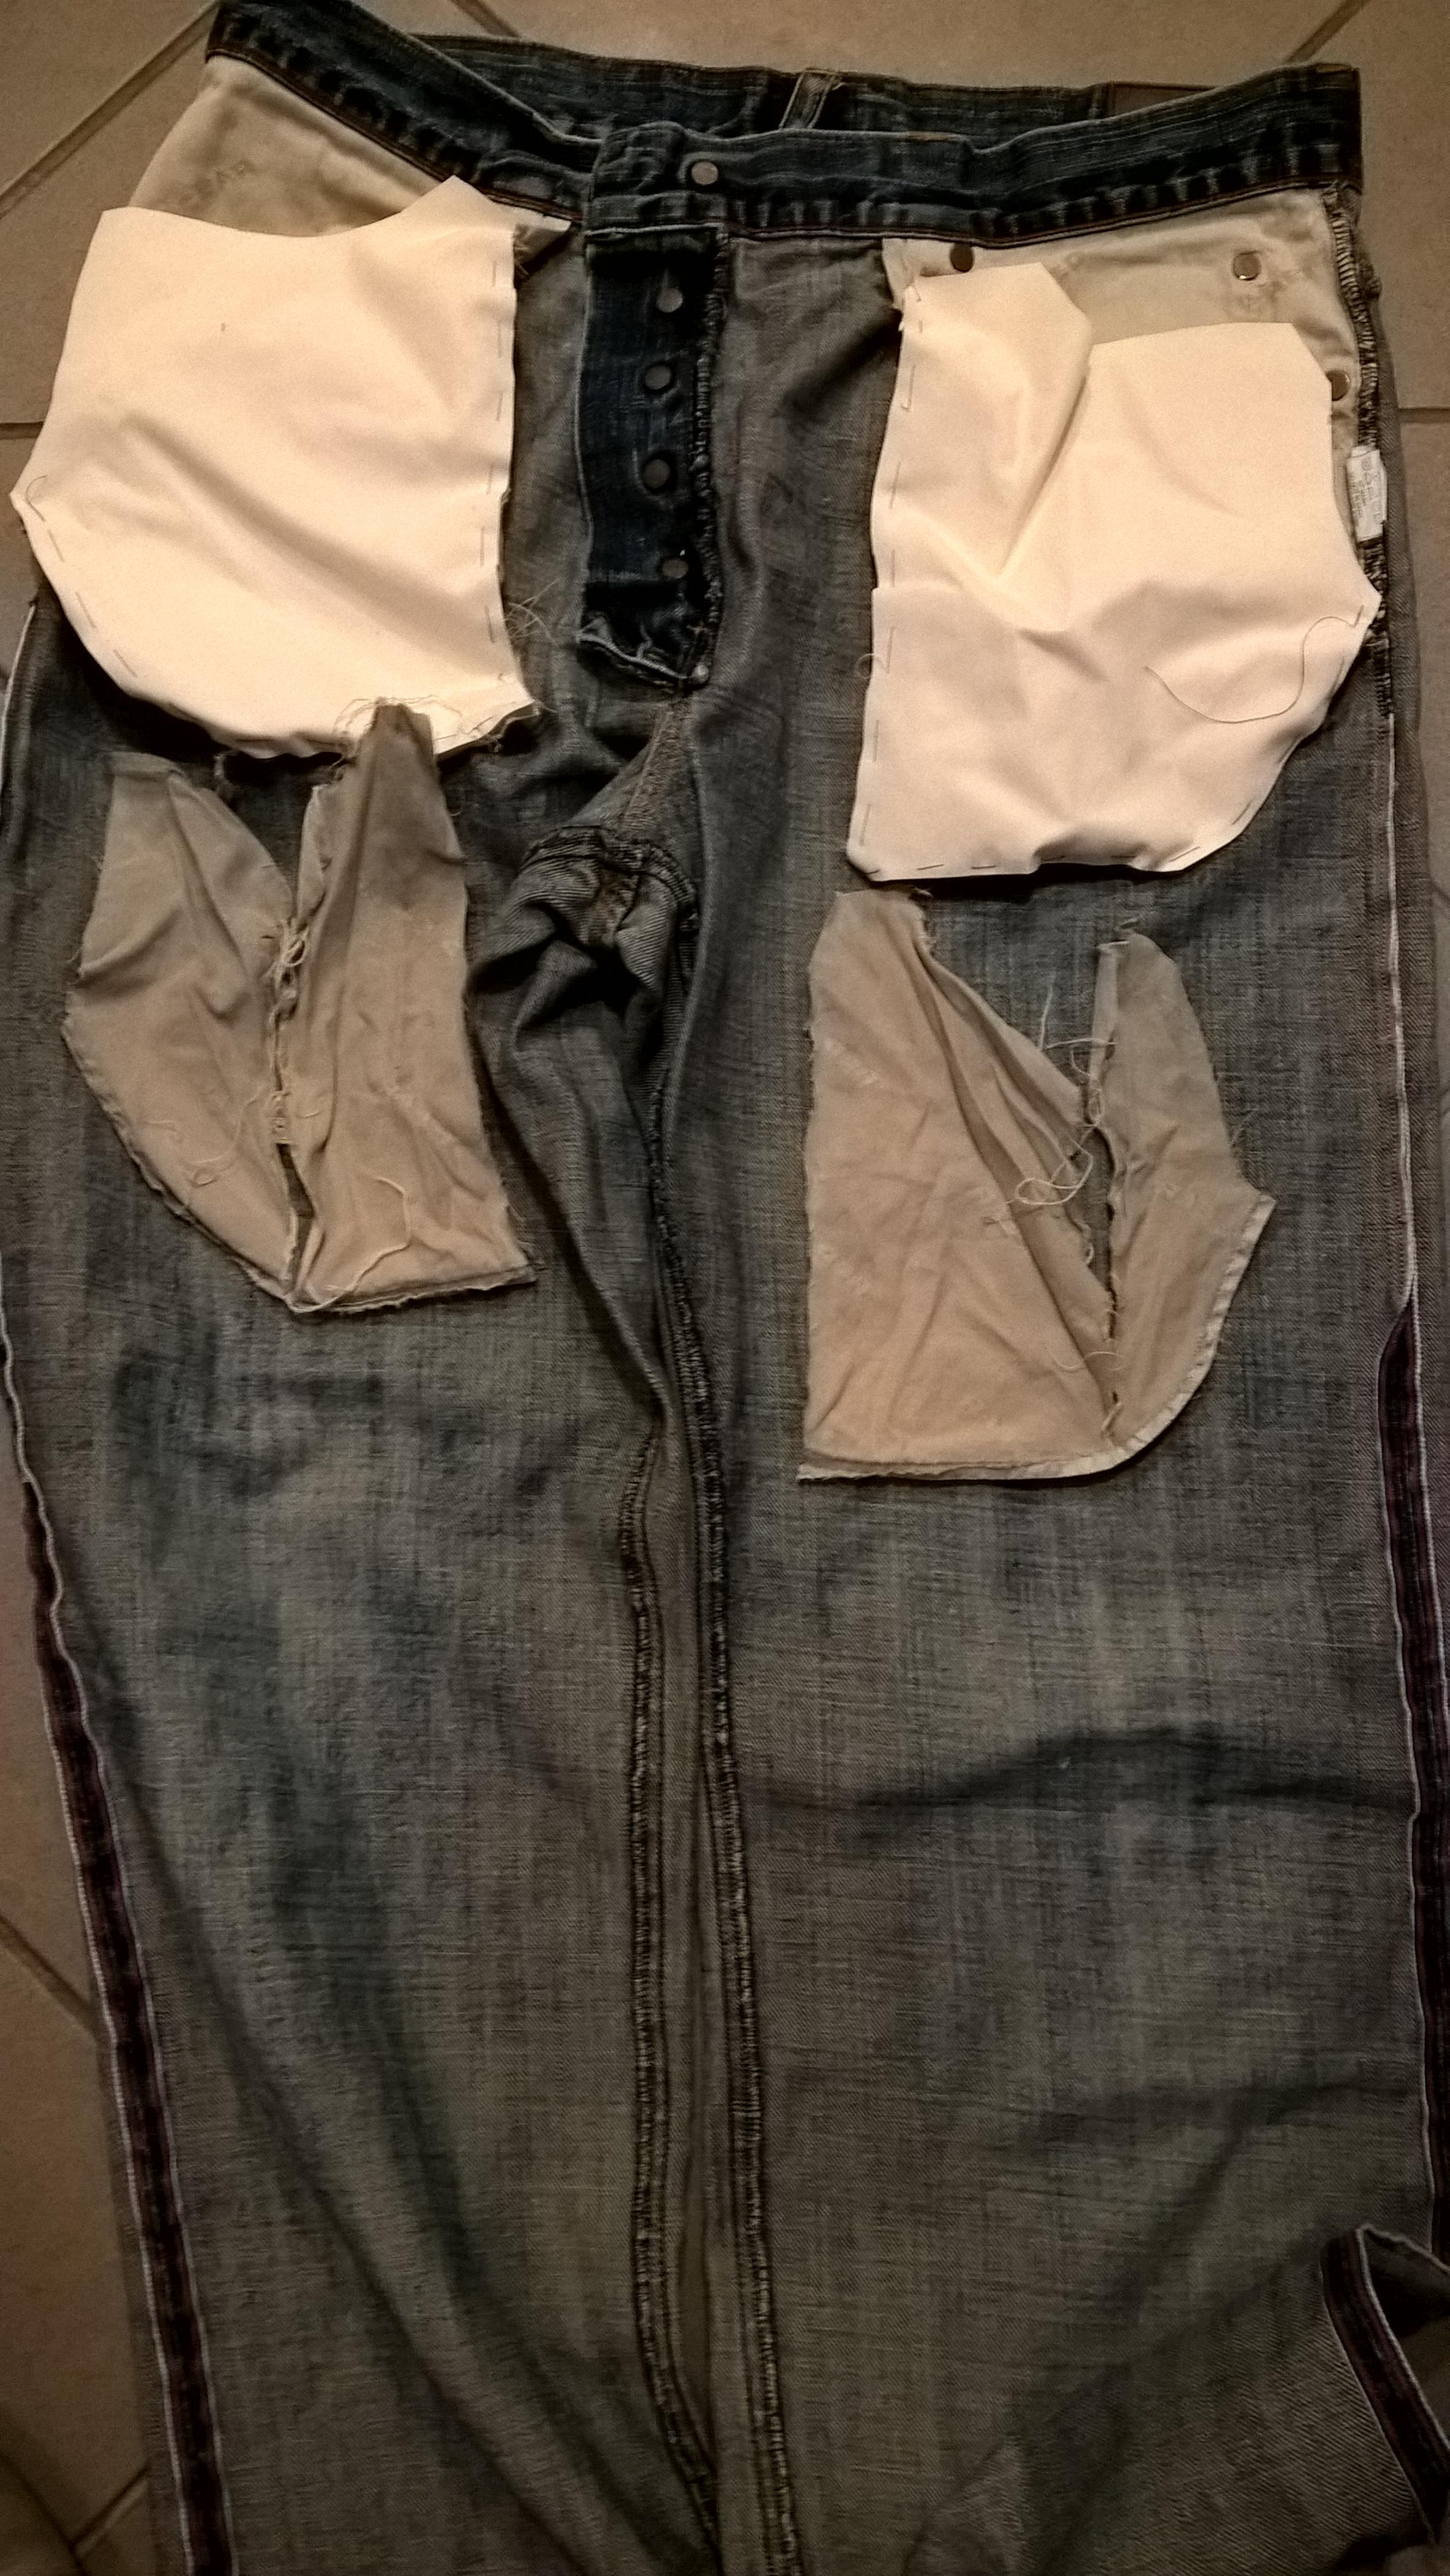 New inside pockets made for these jeans, the only part of them that had worn out!